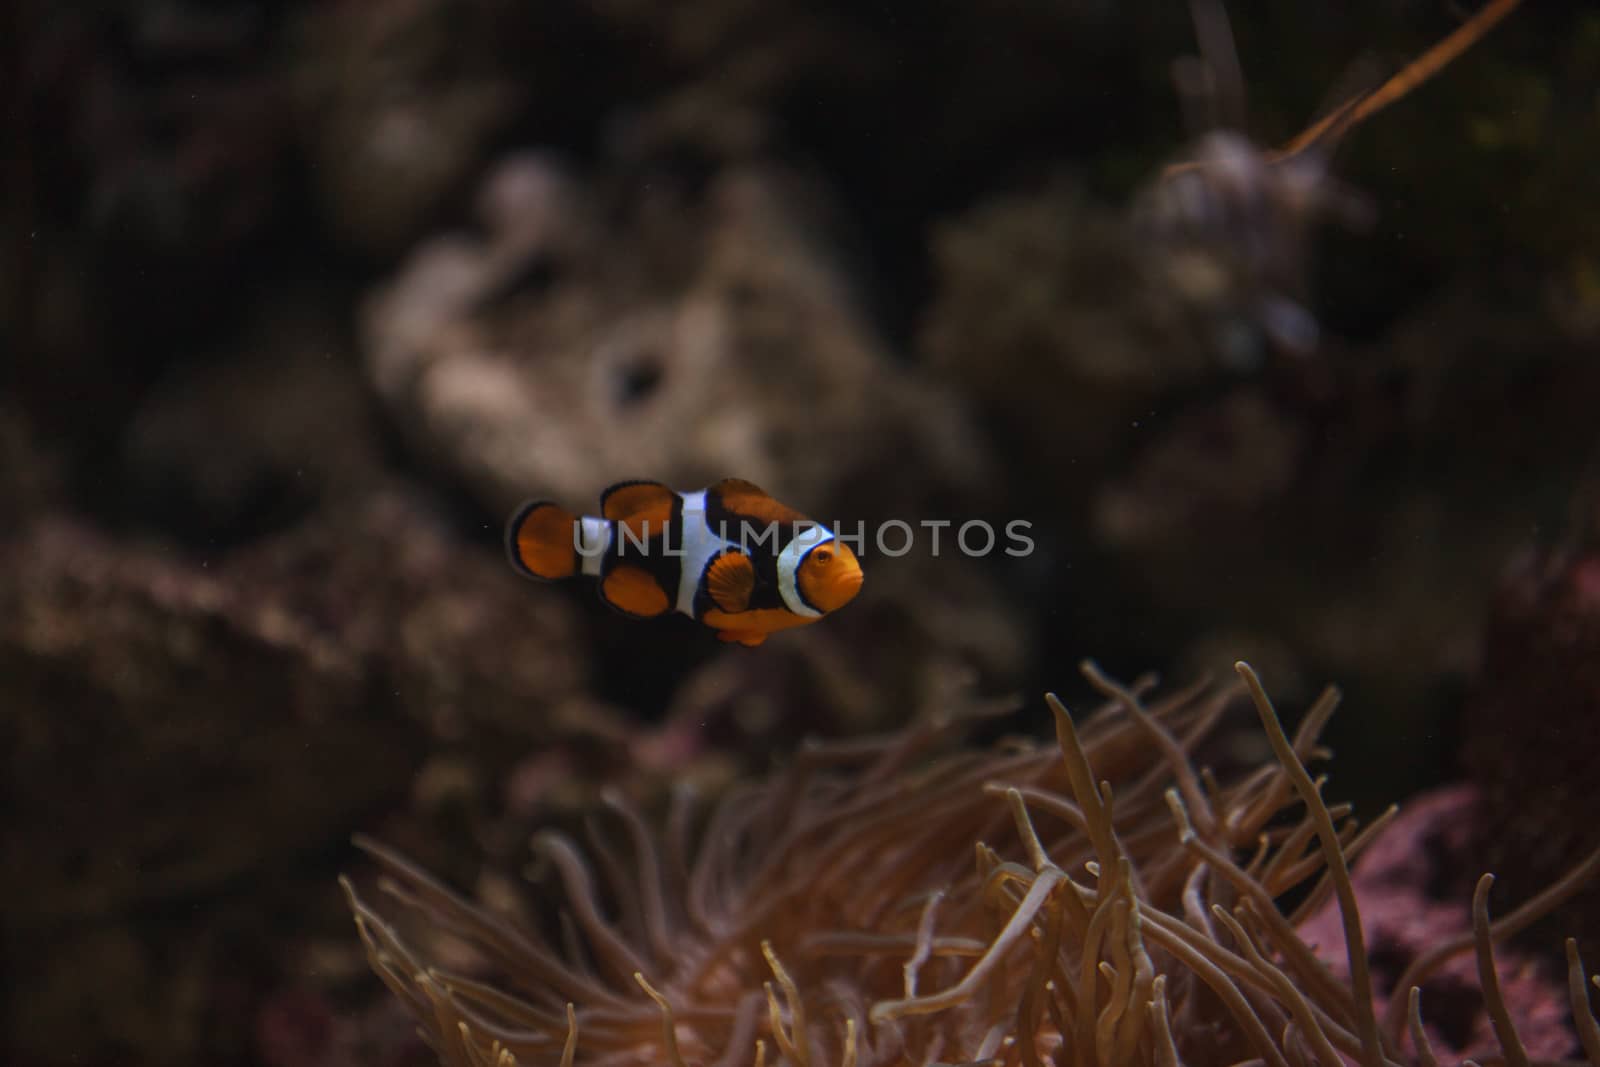 Clownfish, Amphiprioninae, in a marine fish and reef aquarium, staying close to its host anemone